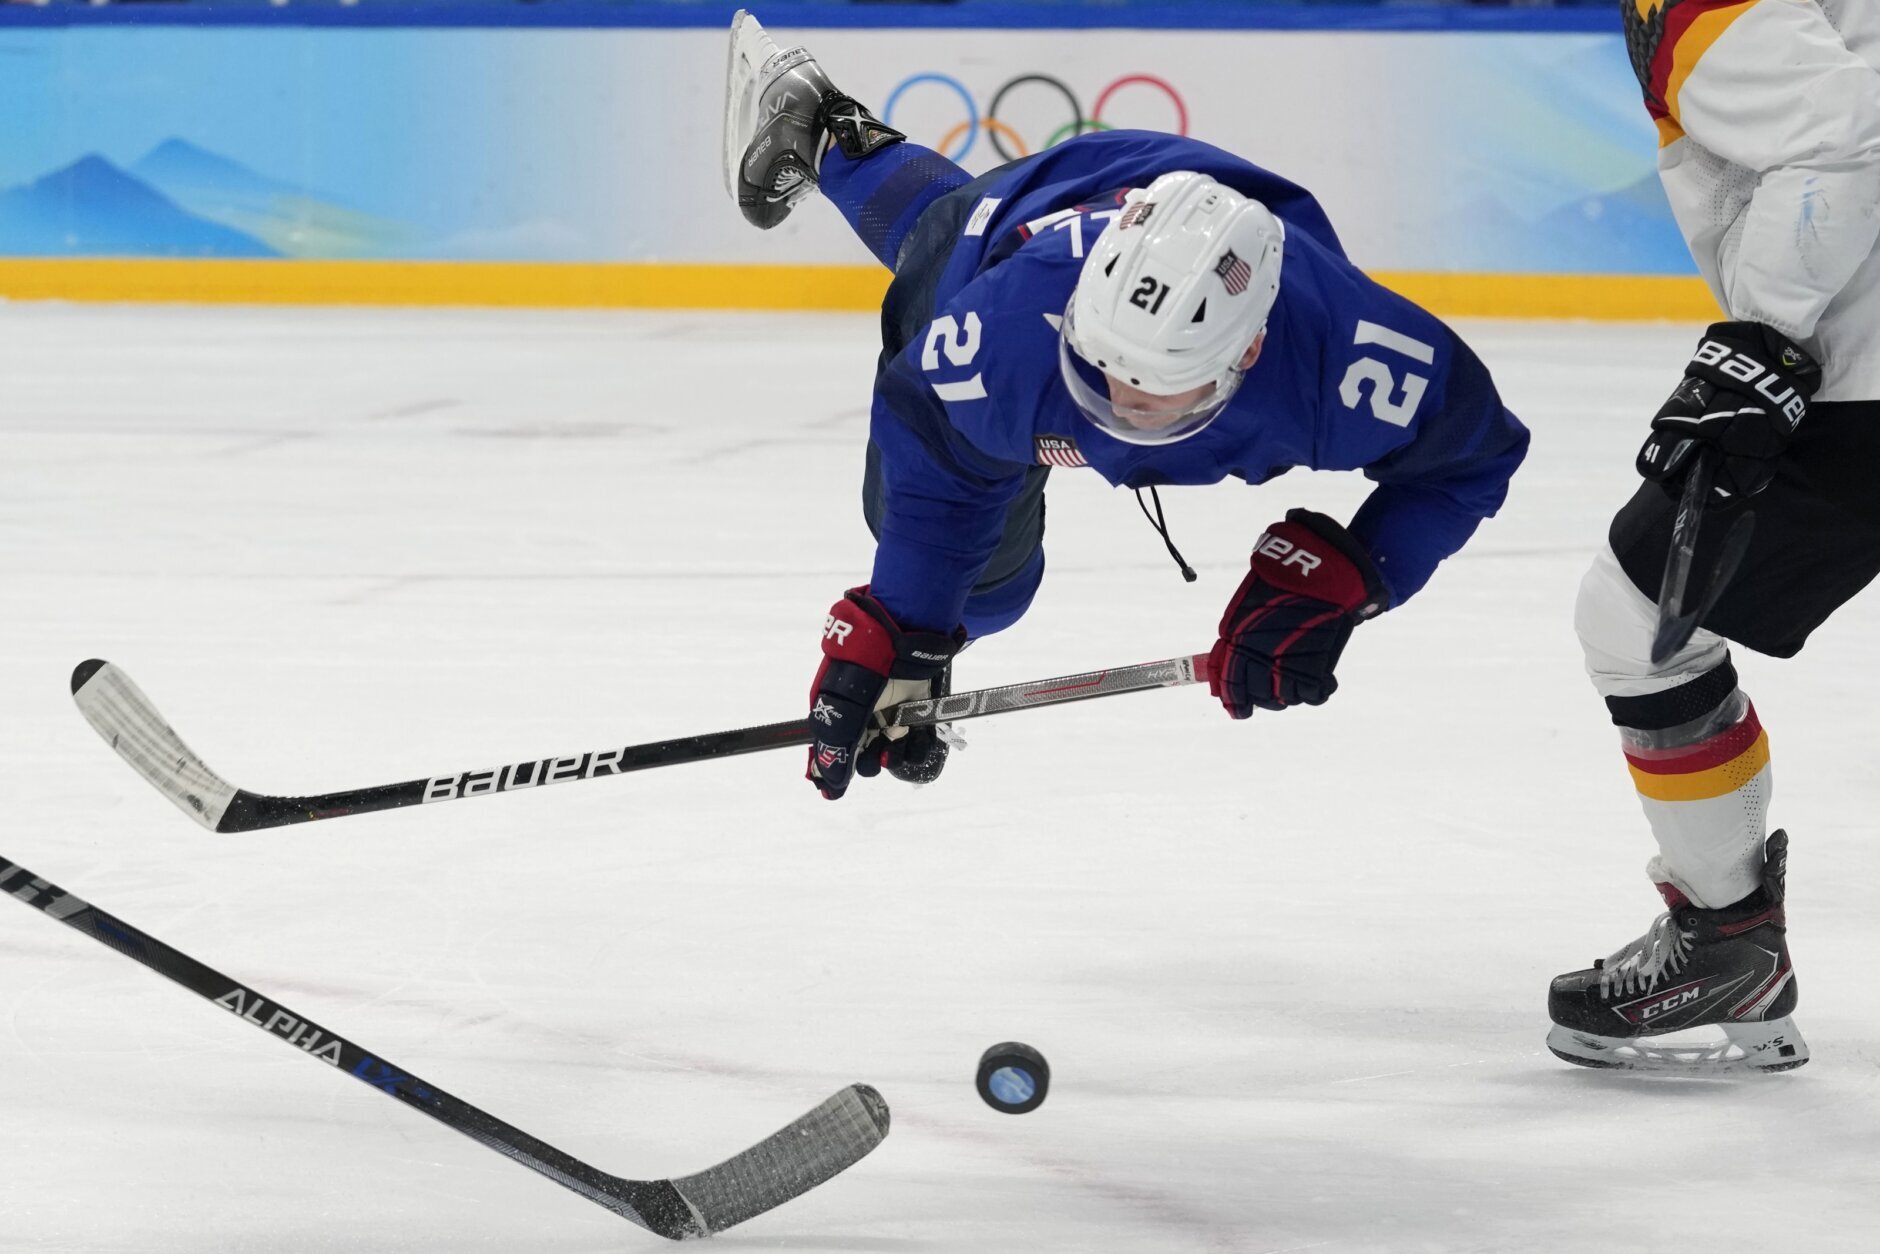 <p>United States&#8217; Brian O&#8217;Neill falls as he goes for the puck during a preliminary round men&#8217;s hockey game against Germany at the 2022 Winter Olympics, Sunday, Feb. 13, 2022, in Beijing.</p>
